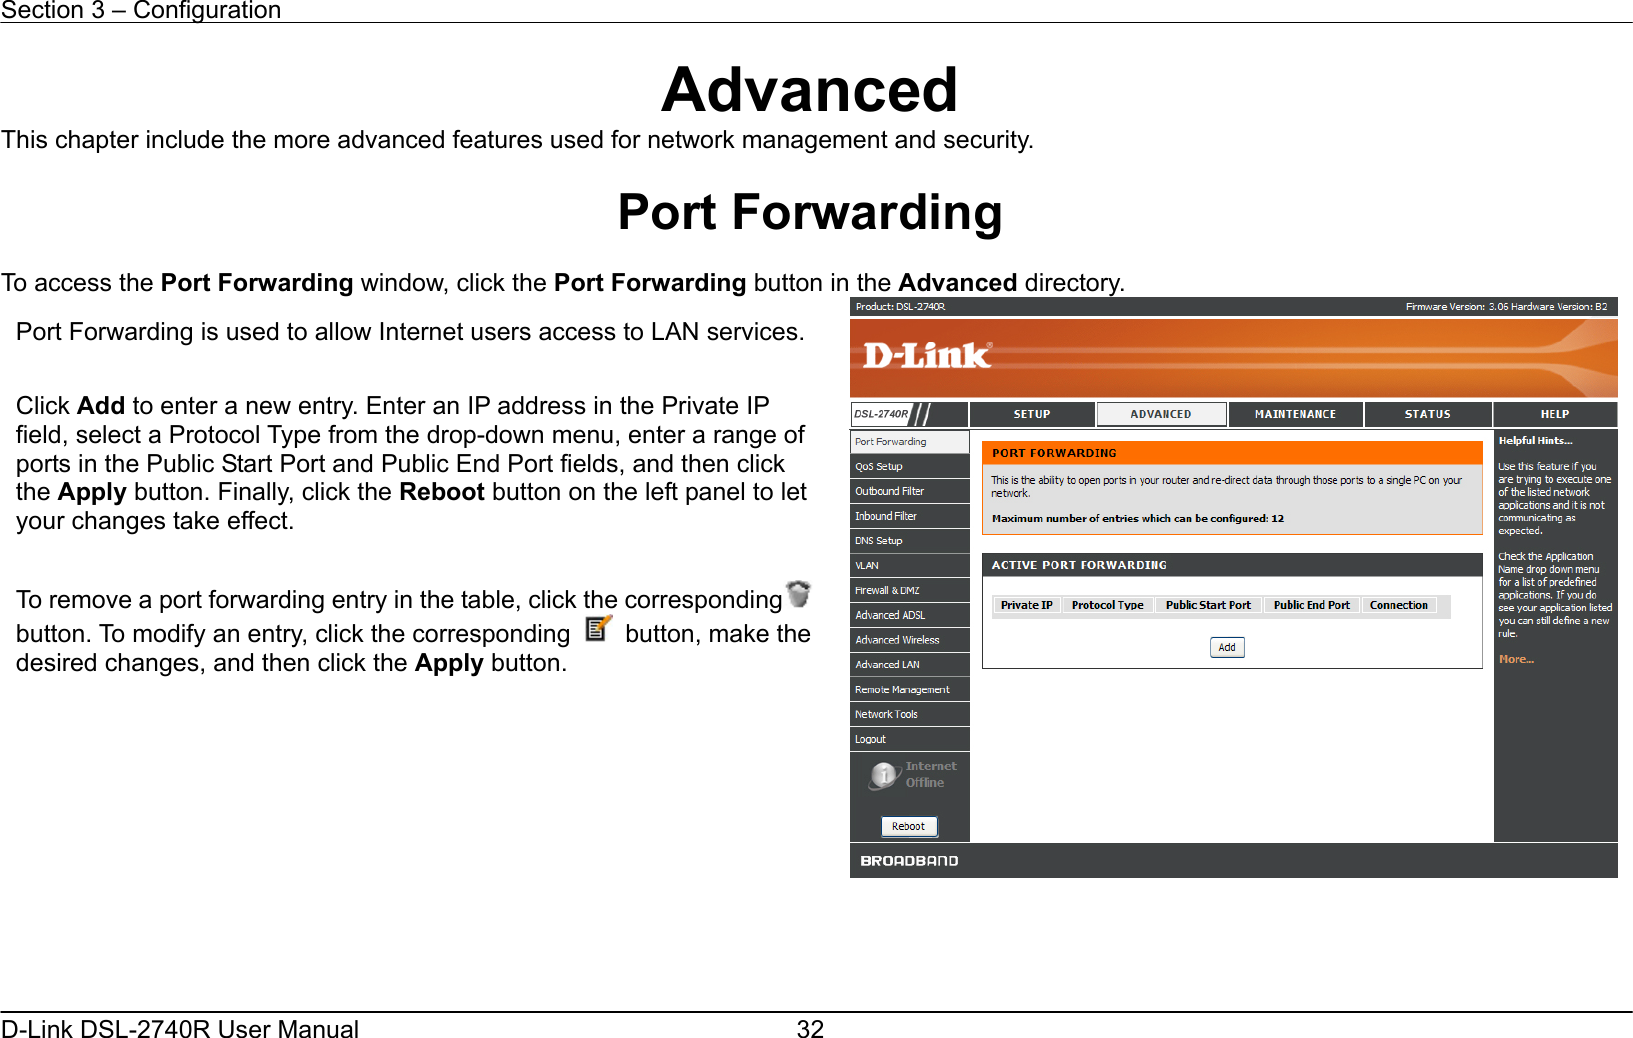 Section 3 – Configuration   D-Link DSL-2740R User Manual  32Advanced This chapter include the more advanced features used for network management and security.  Port Forwarding  To access the Port Forwarding window, click the Port Forwarding button in the Advanced directory.      Port Forwarding is used to allow Internet users access to LAN services. Click Add to enter a new entry. Enter an IP address in the Private IP field, select a Protocol Type from the drop-down menu, enter a range of ports in the Public Start Port and Public End Port fields, and then click the Apply button. Finally, click the Reboot button on the left panel to let your changes take effect.  To remove a port forwarding entry in the table, click the correspondingbutton. To modify an entry, click the corresponding  button, make the desired changes, and then click the Apply button. 